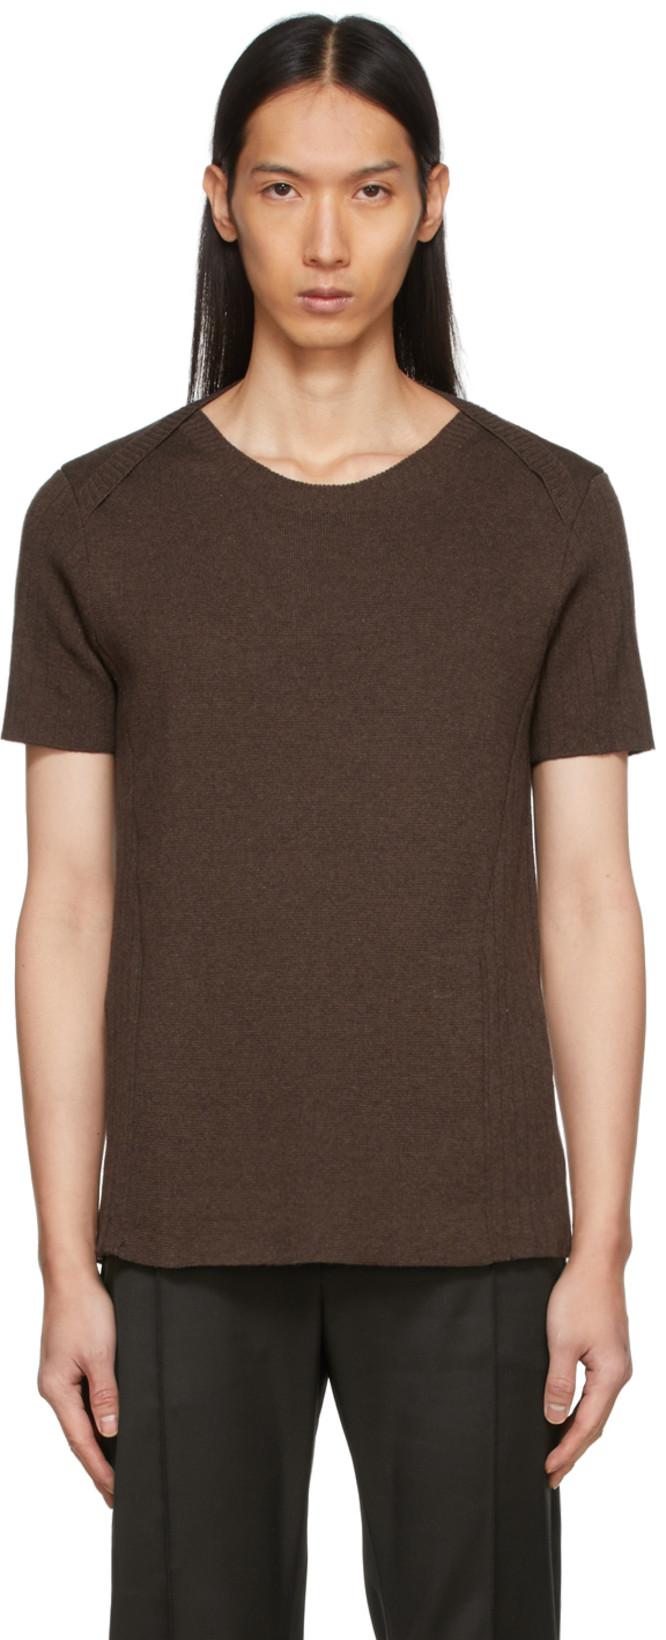 SSENSE Exclusive Brown Clementi T-Shirt by ADYAR